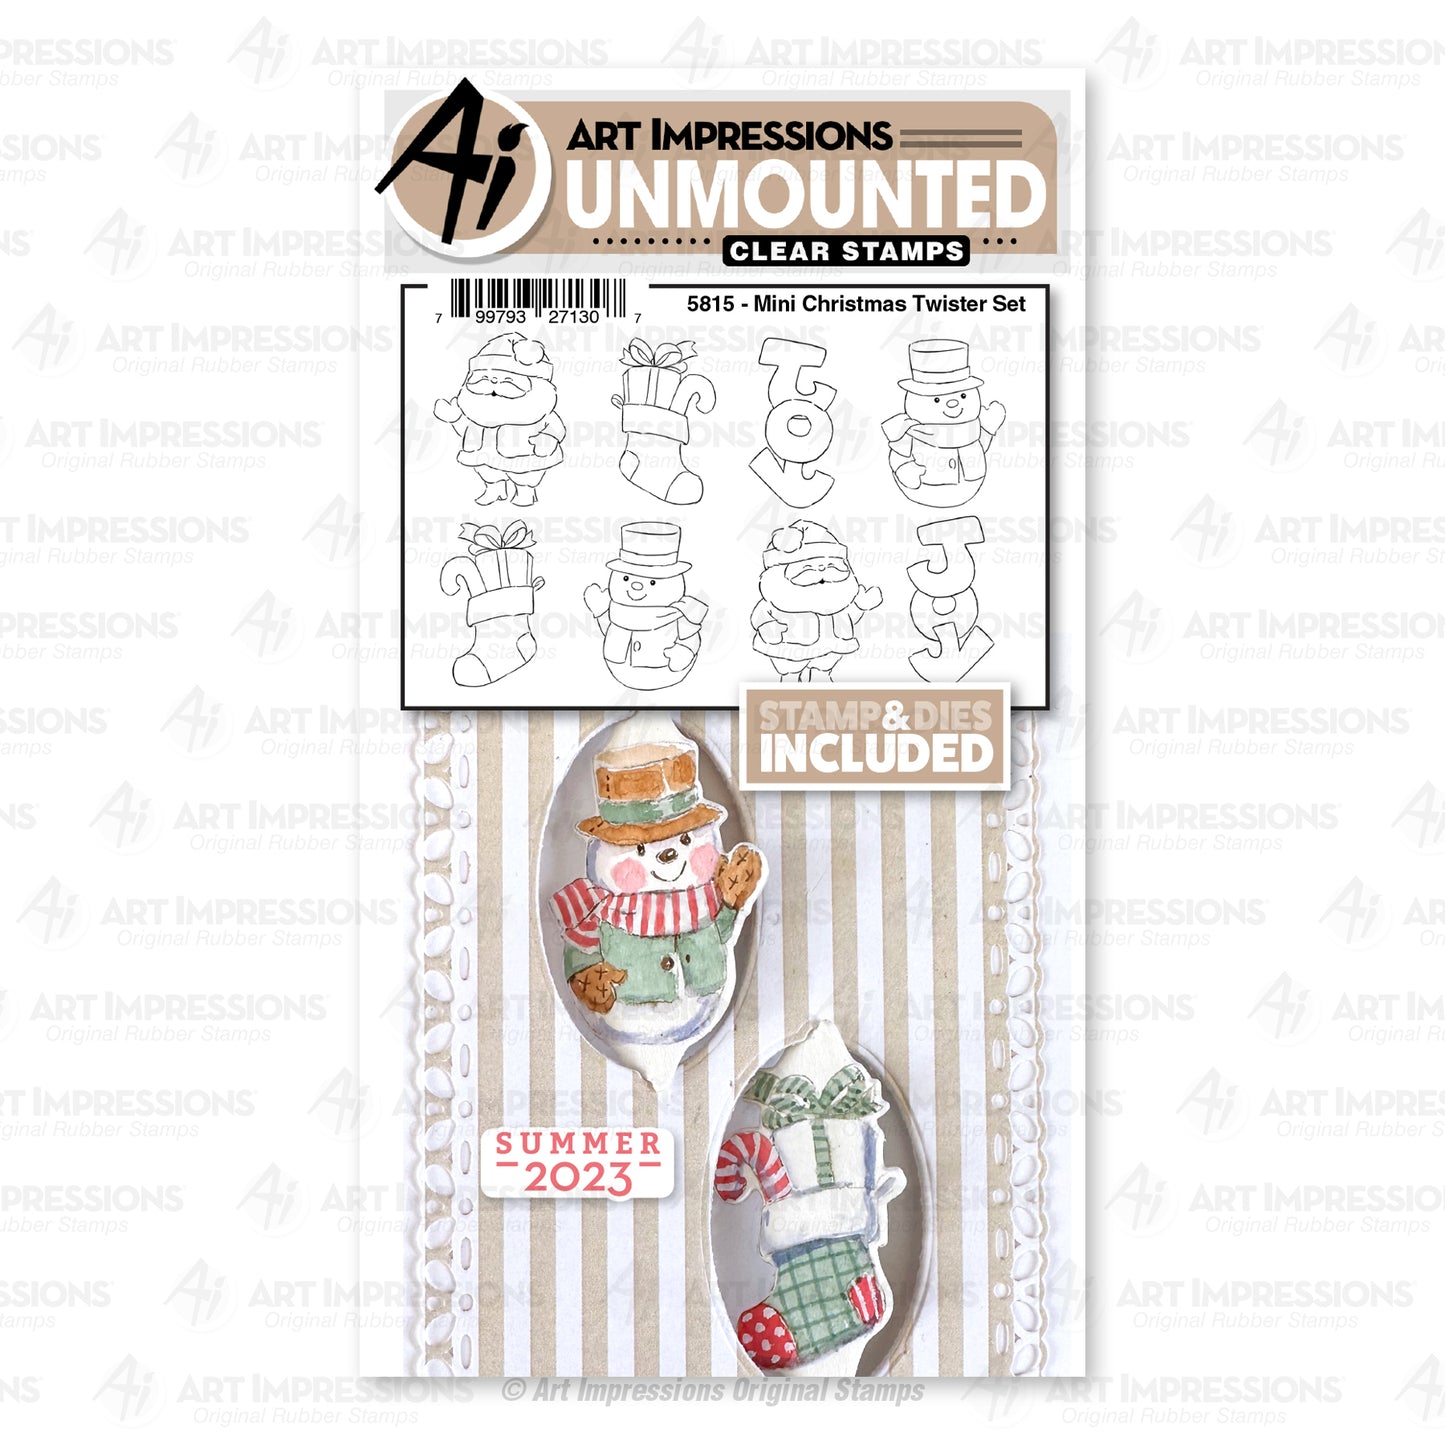 Art Impressions Mini Christmas Twisters Stamps and Dies Set - 5815